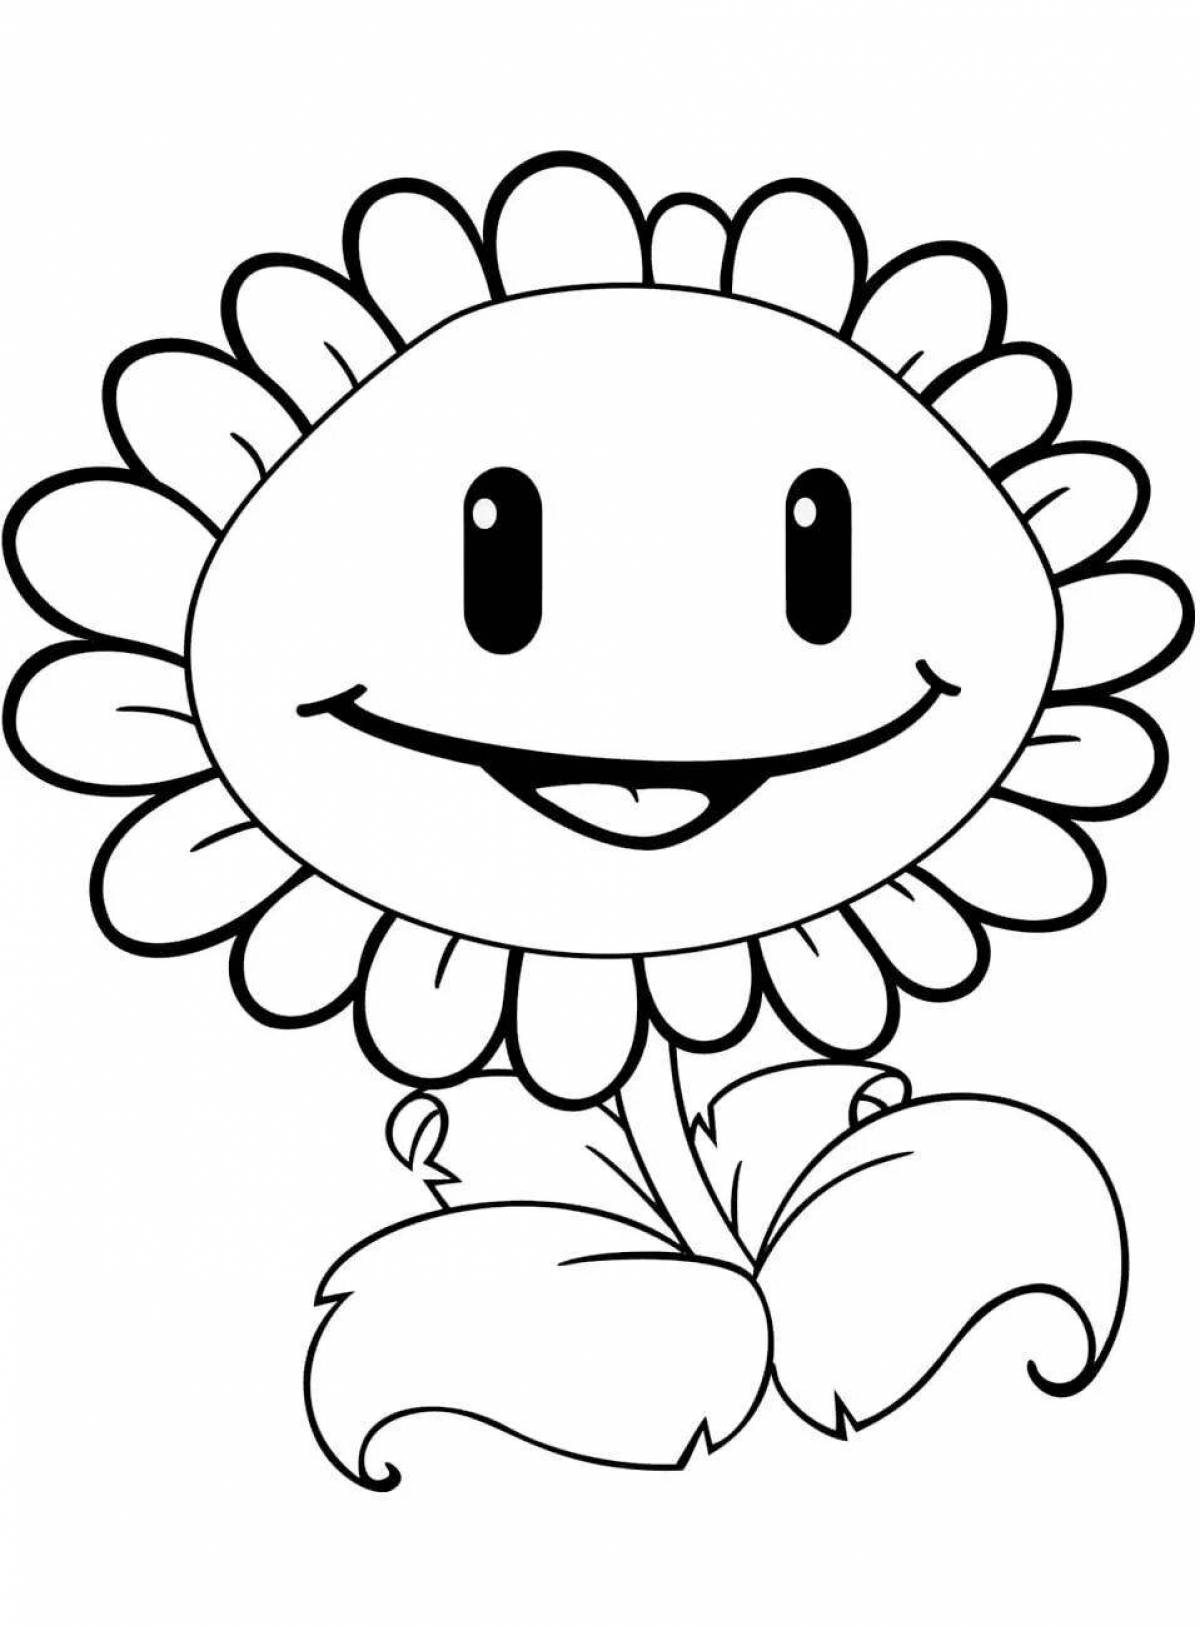 Colorful glitter coloring plants vs zombies sunflower